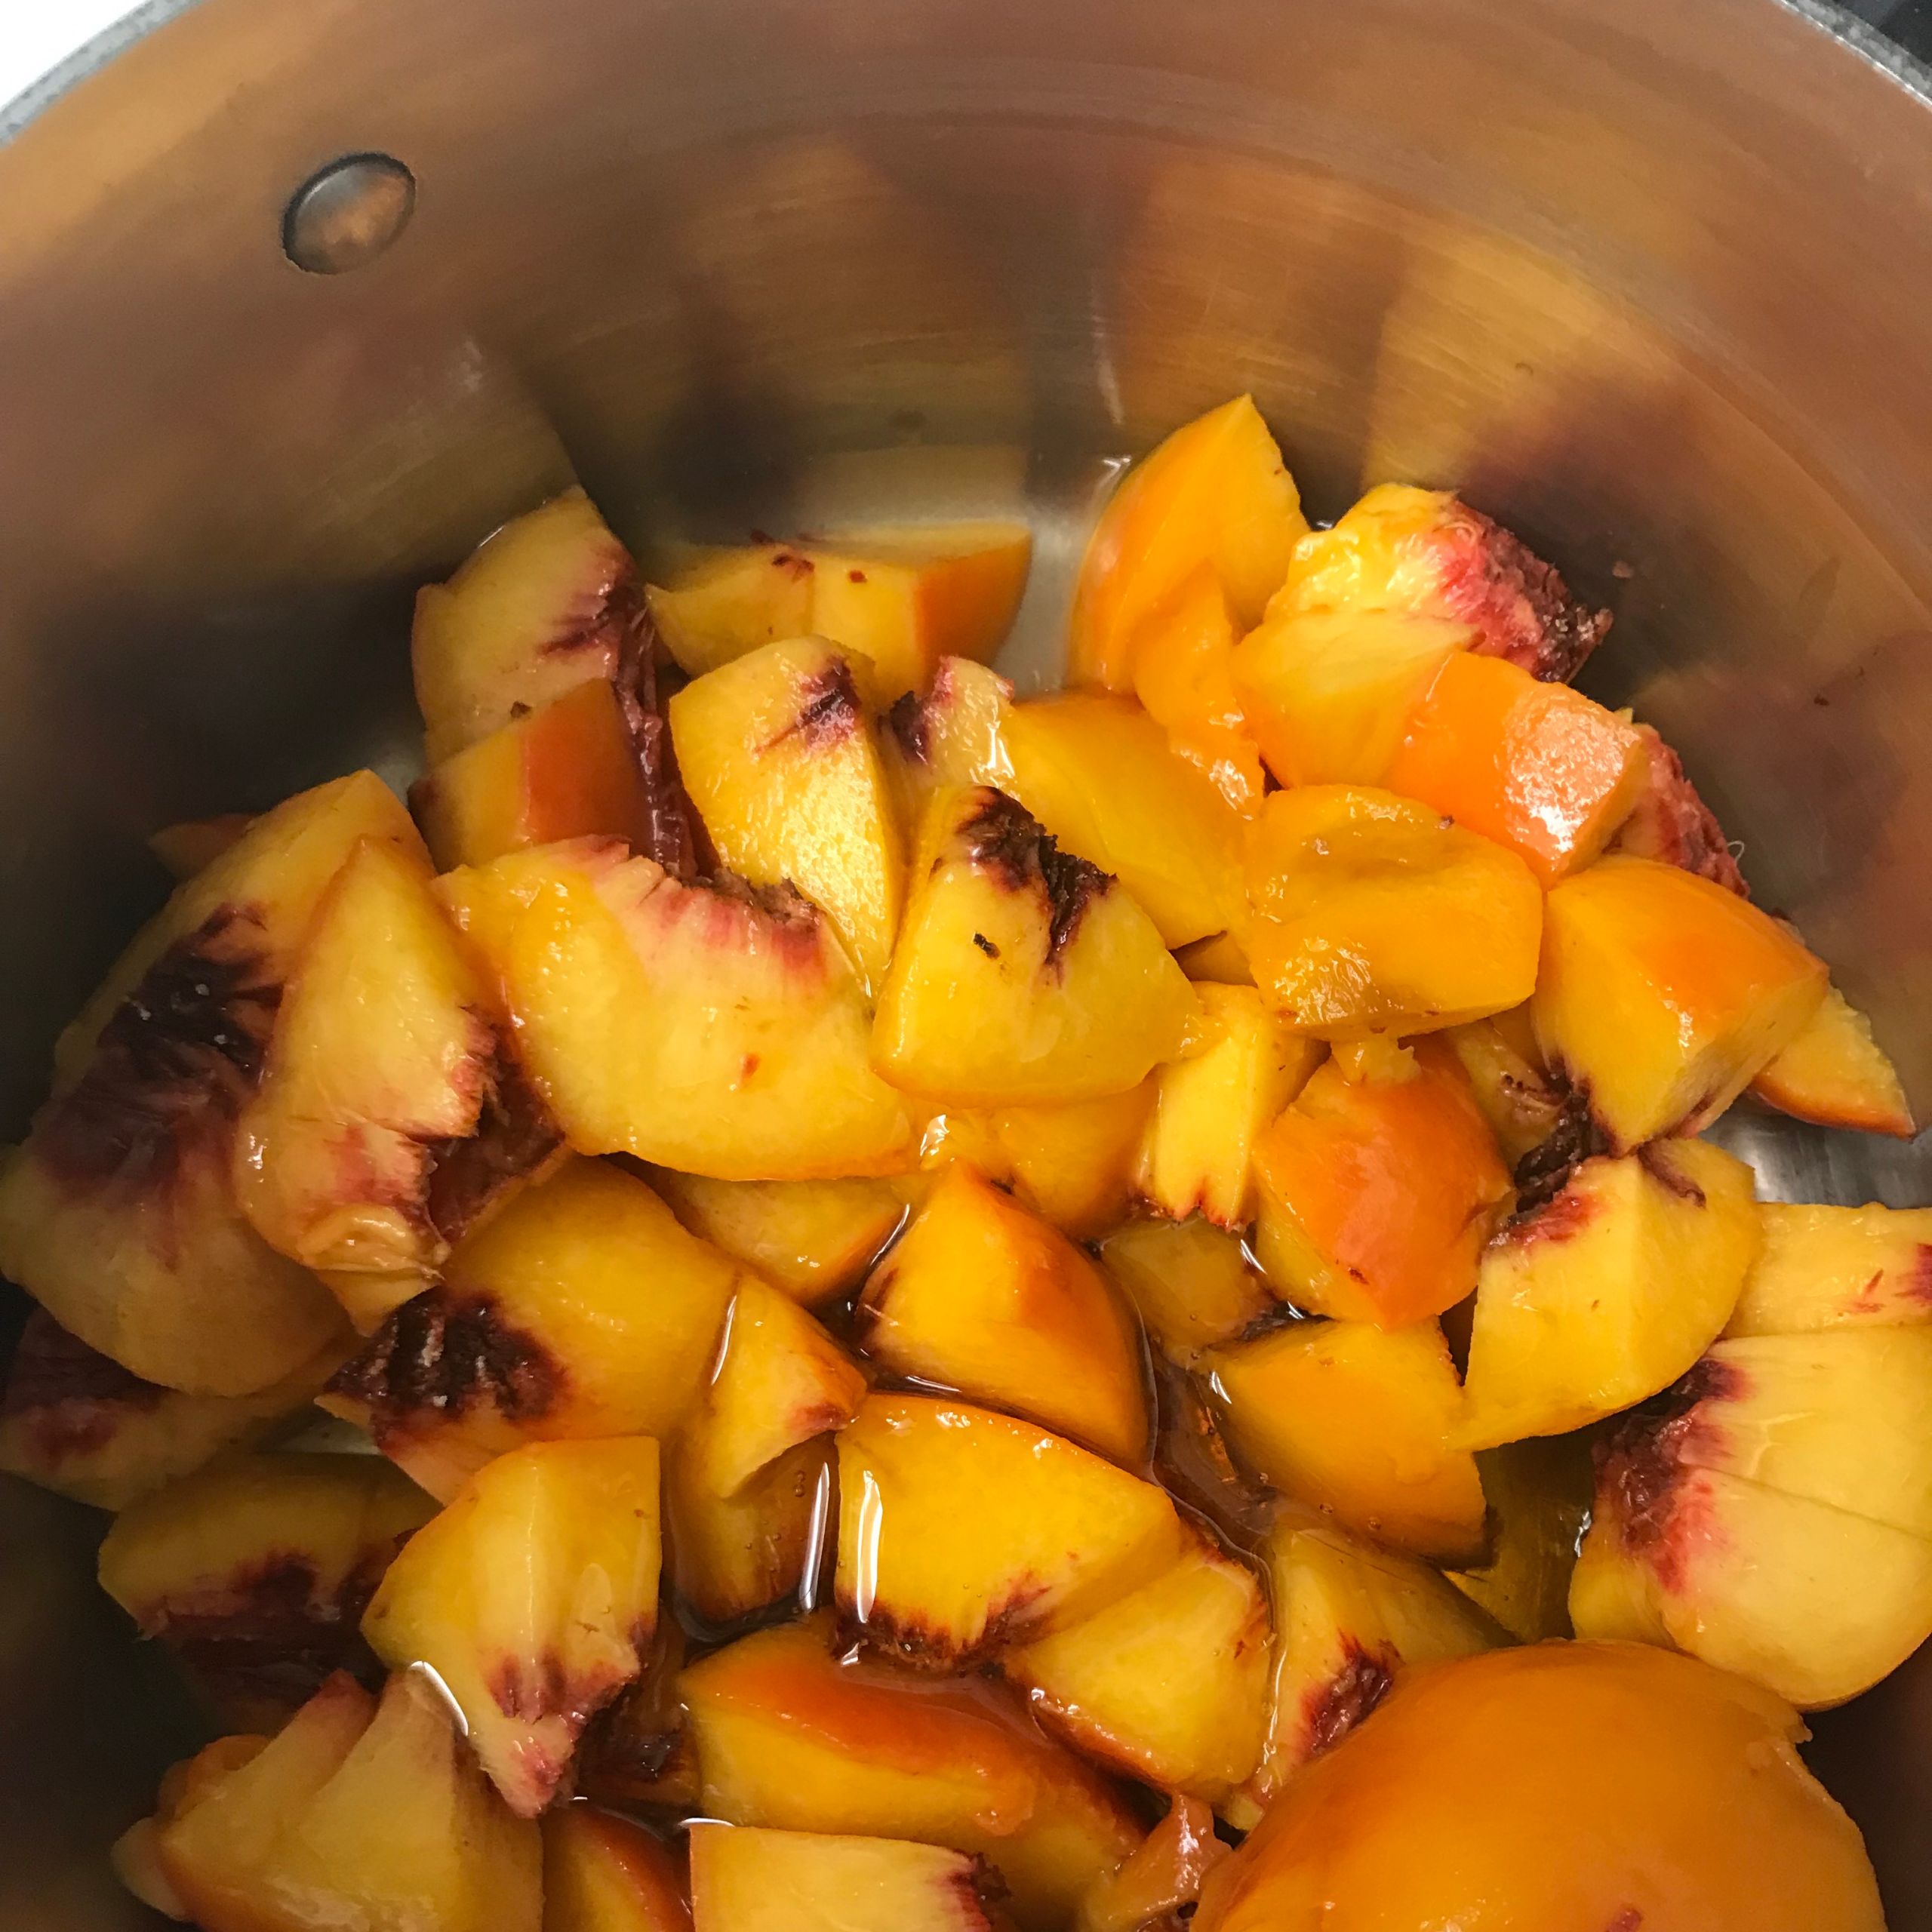 Peaches in pot cooking